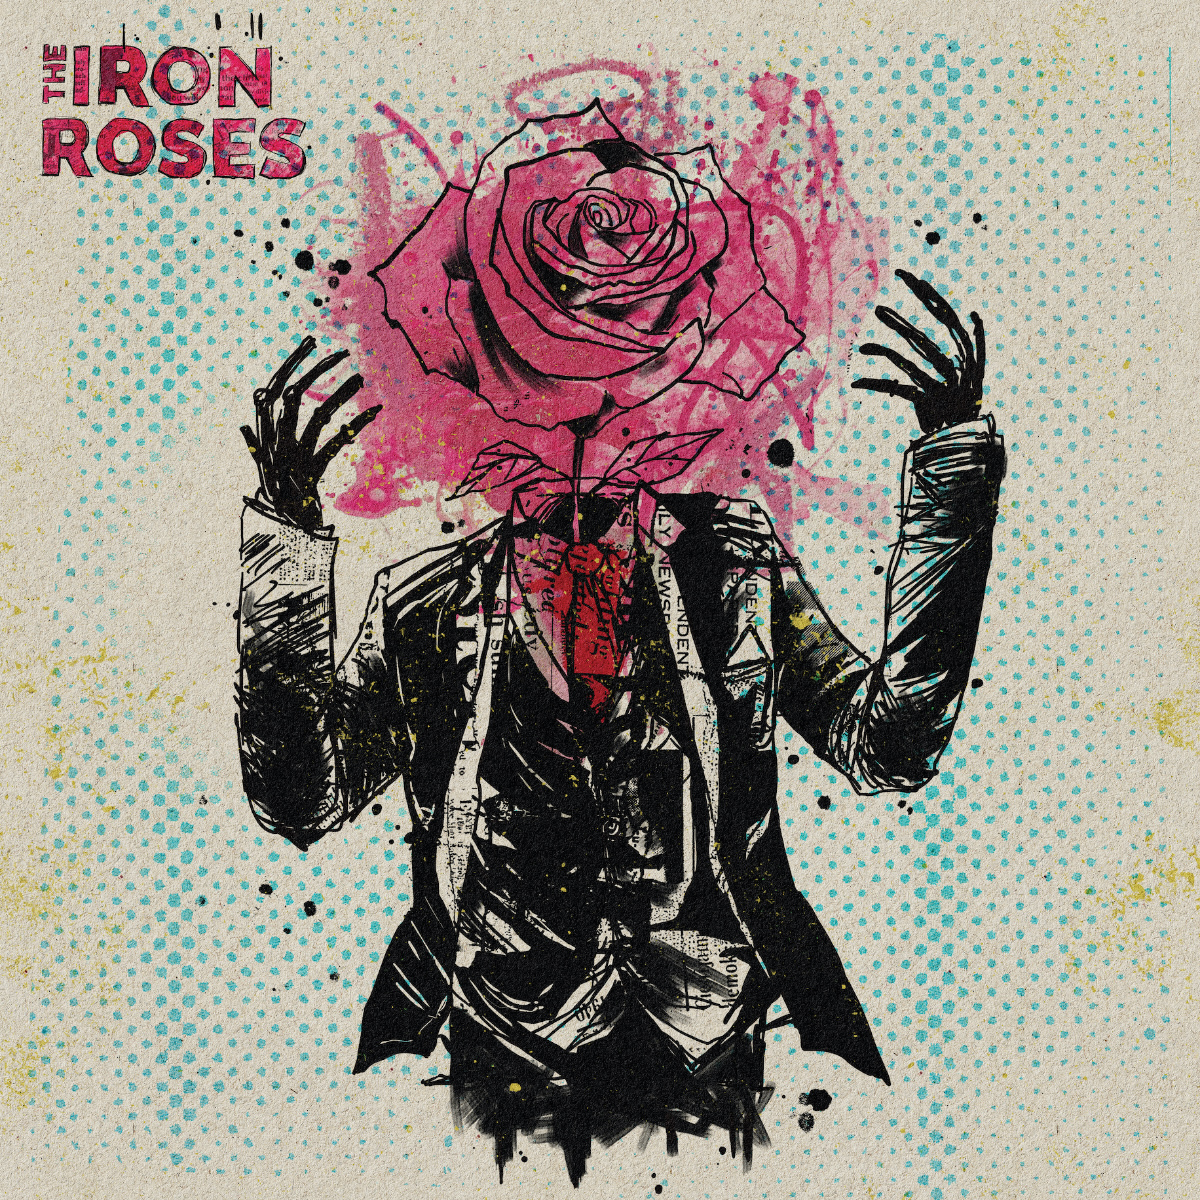 12 - The Iron Roses - Cover.jpg (1.48 MB)